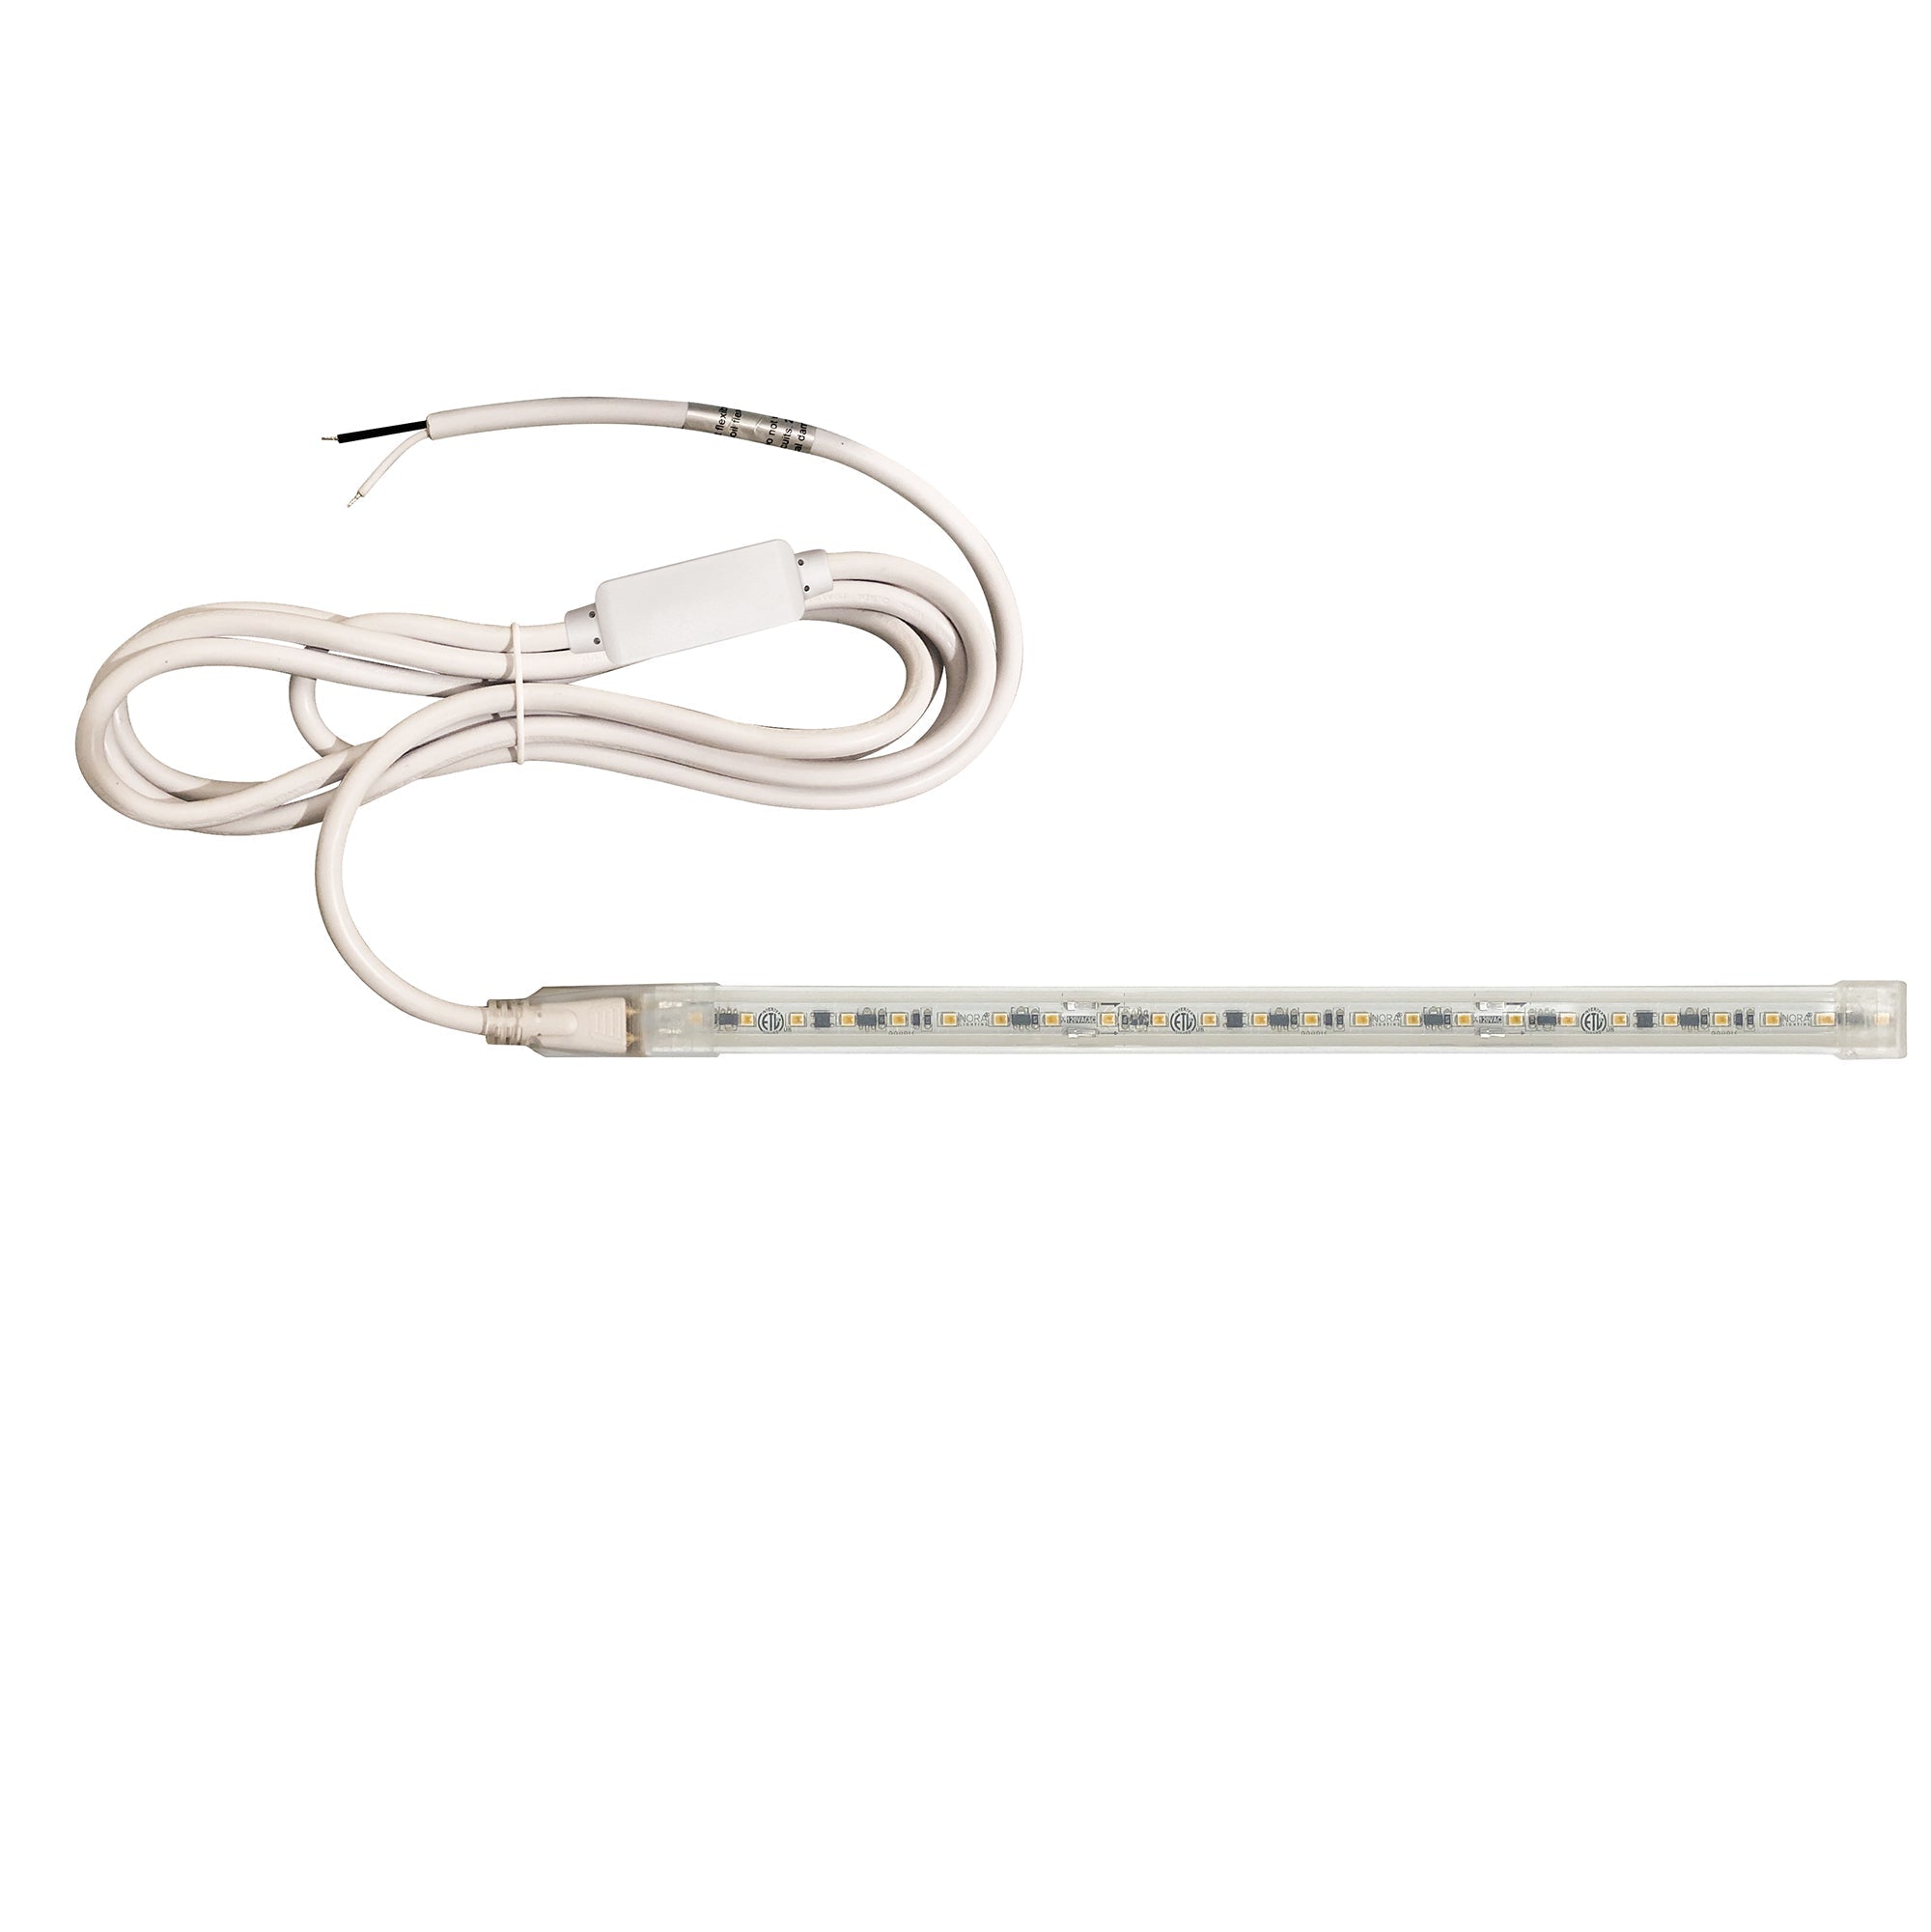 Nora Lighting NUTP13-143-12-940/HWSP - Accent / Undercabinet - Custom Cut 143-ft 120V Continuous LED Tape Light, 330lm / 3.6W per foot, 4000K, w/ Mounting Clips and 8' Hardwired Power Cord w/ Surge Protector